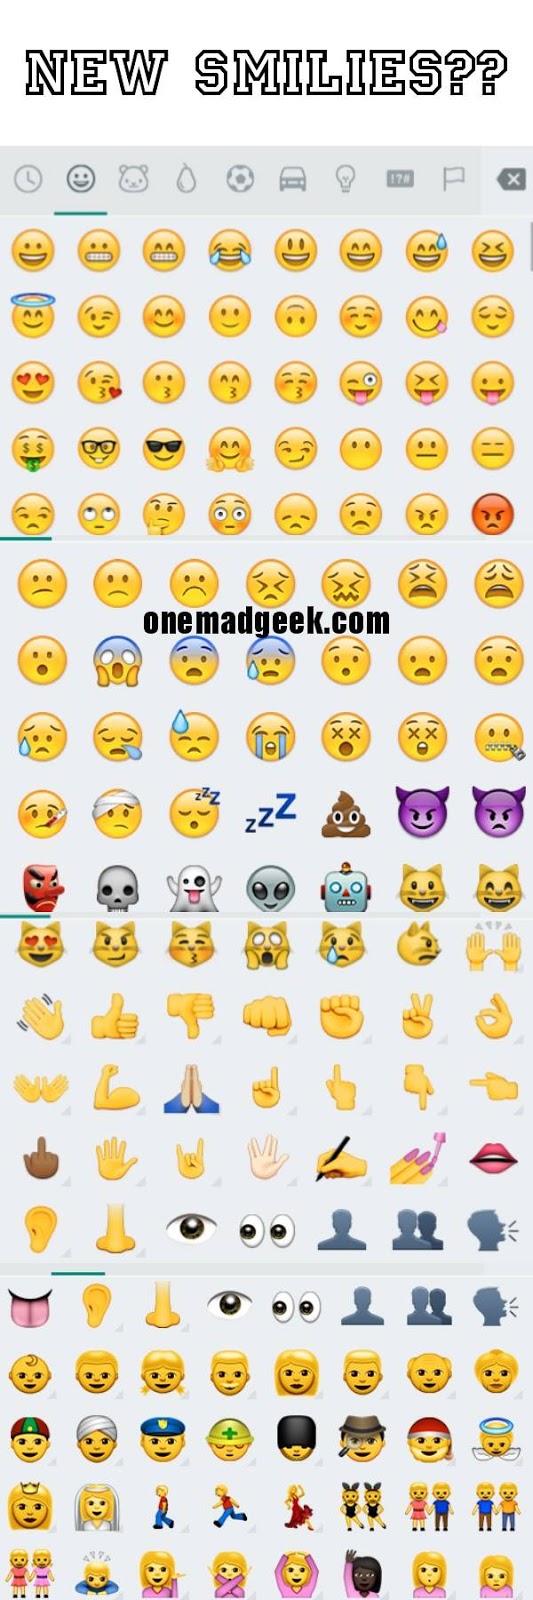 Whatsapp is packed with new Smileys - Version 2.12.391